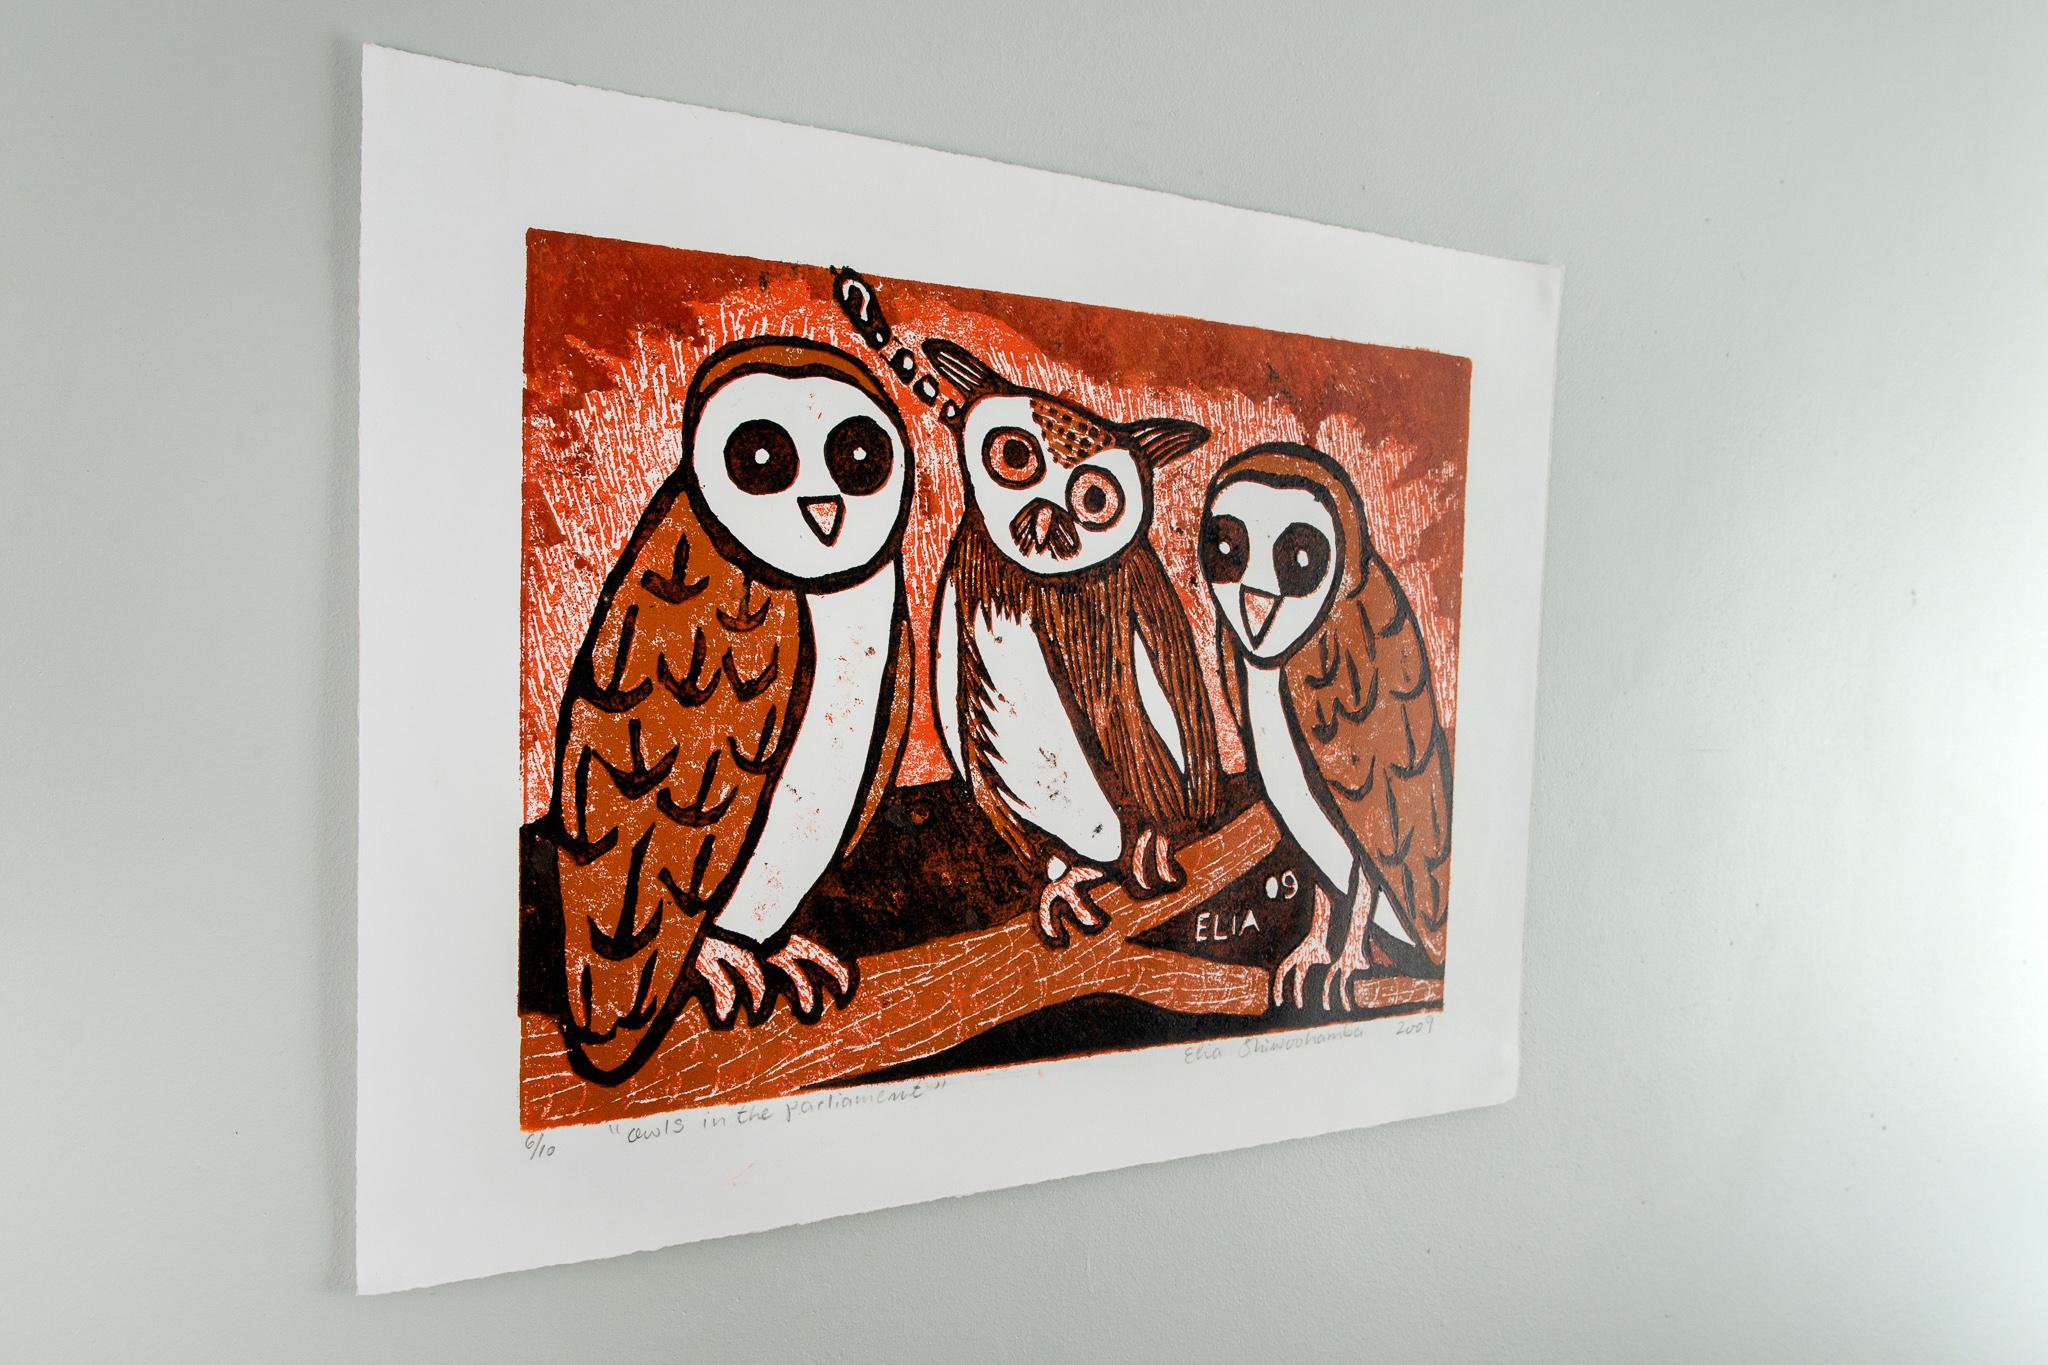 Owls in Parliament, 2009. Cardboard print on paper. Edition of 10.

Elia Shiwoohamba was born in 1981 in Windhoek, Namibia. He graduated from the John Muafangejo Art Centre in Windhoek in 2006. Specialising in printmaking and sculpture, Shiwoohamba